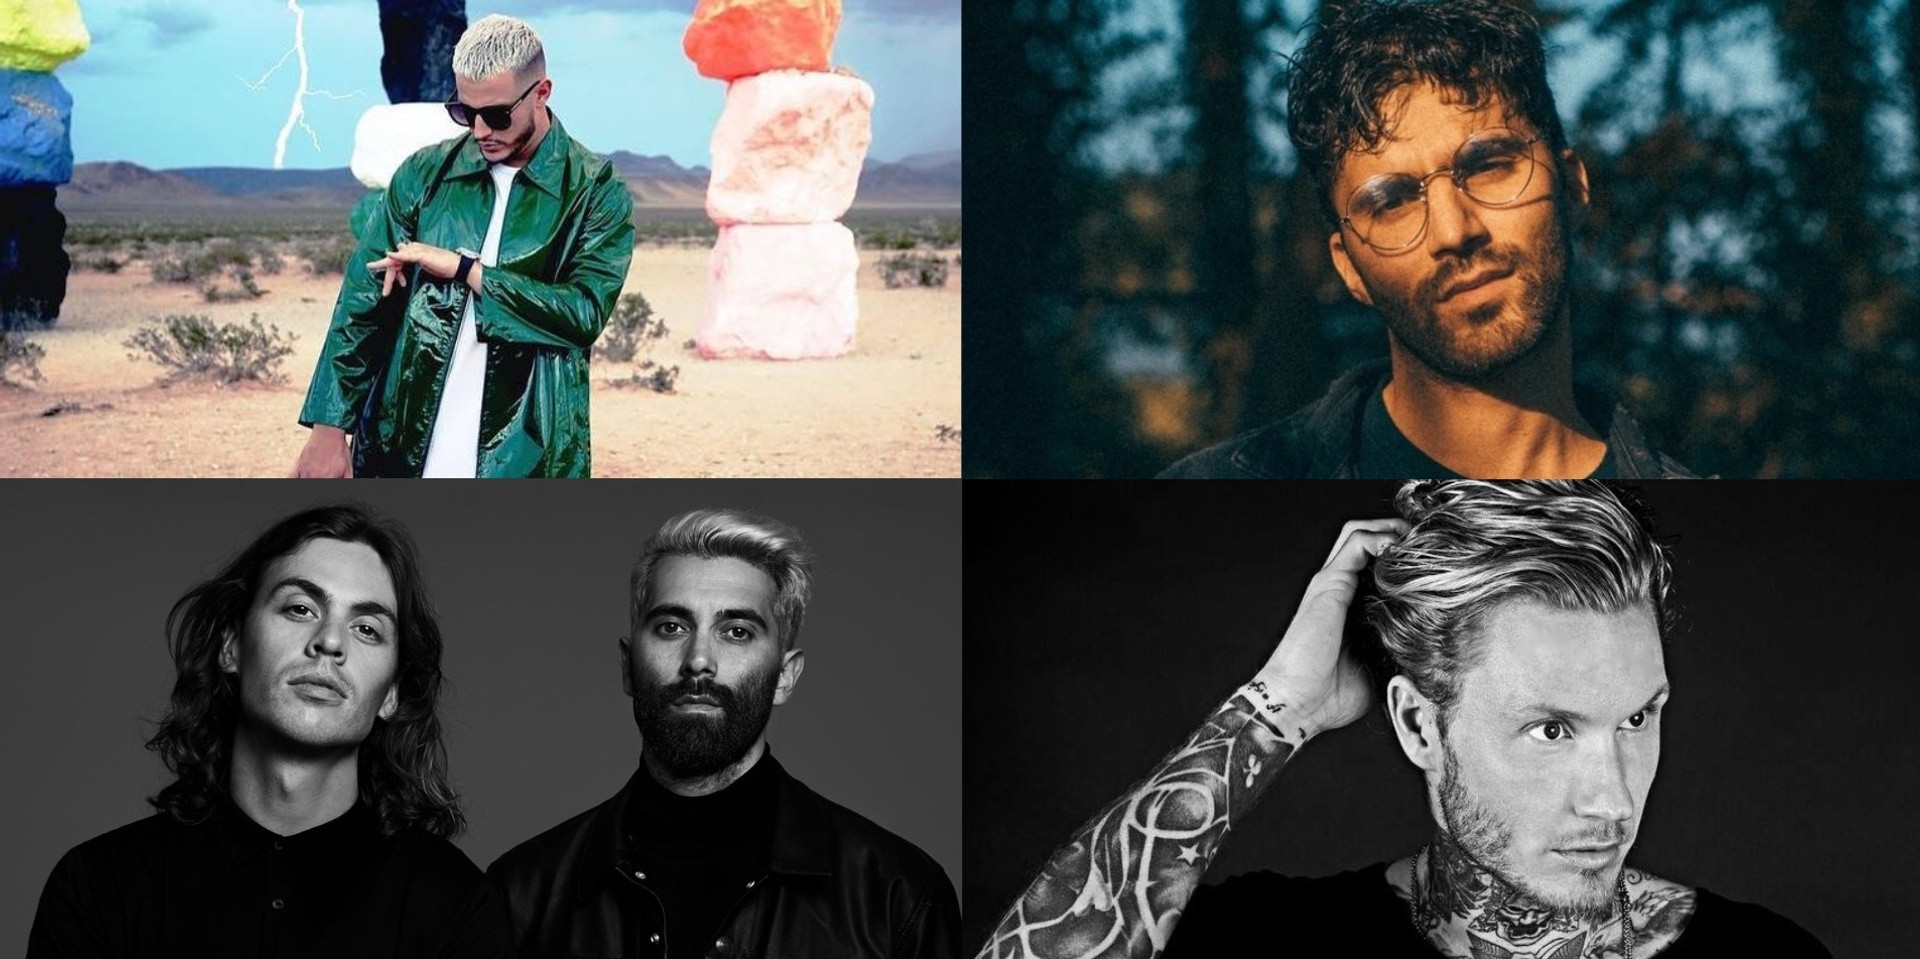 DJ Snake, R3HAB, MORTEN, Yellow Claw, and more to perform at 'HYPEWORLD' festival in Singapore this October